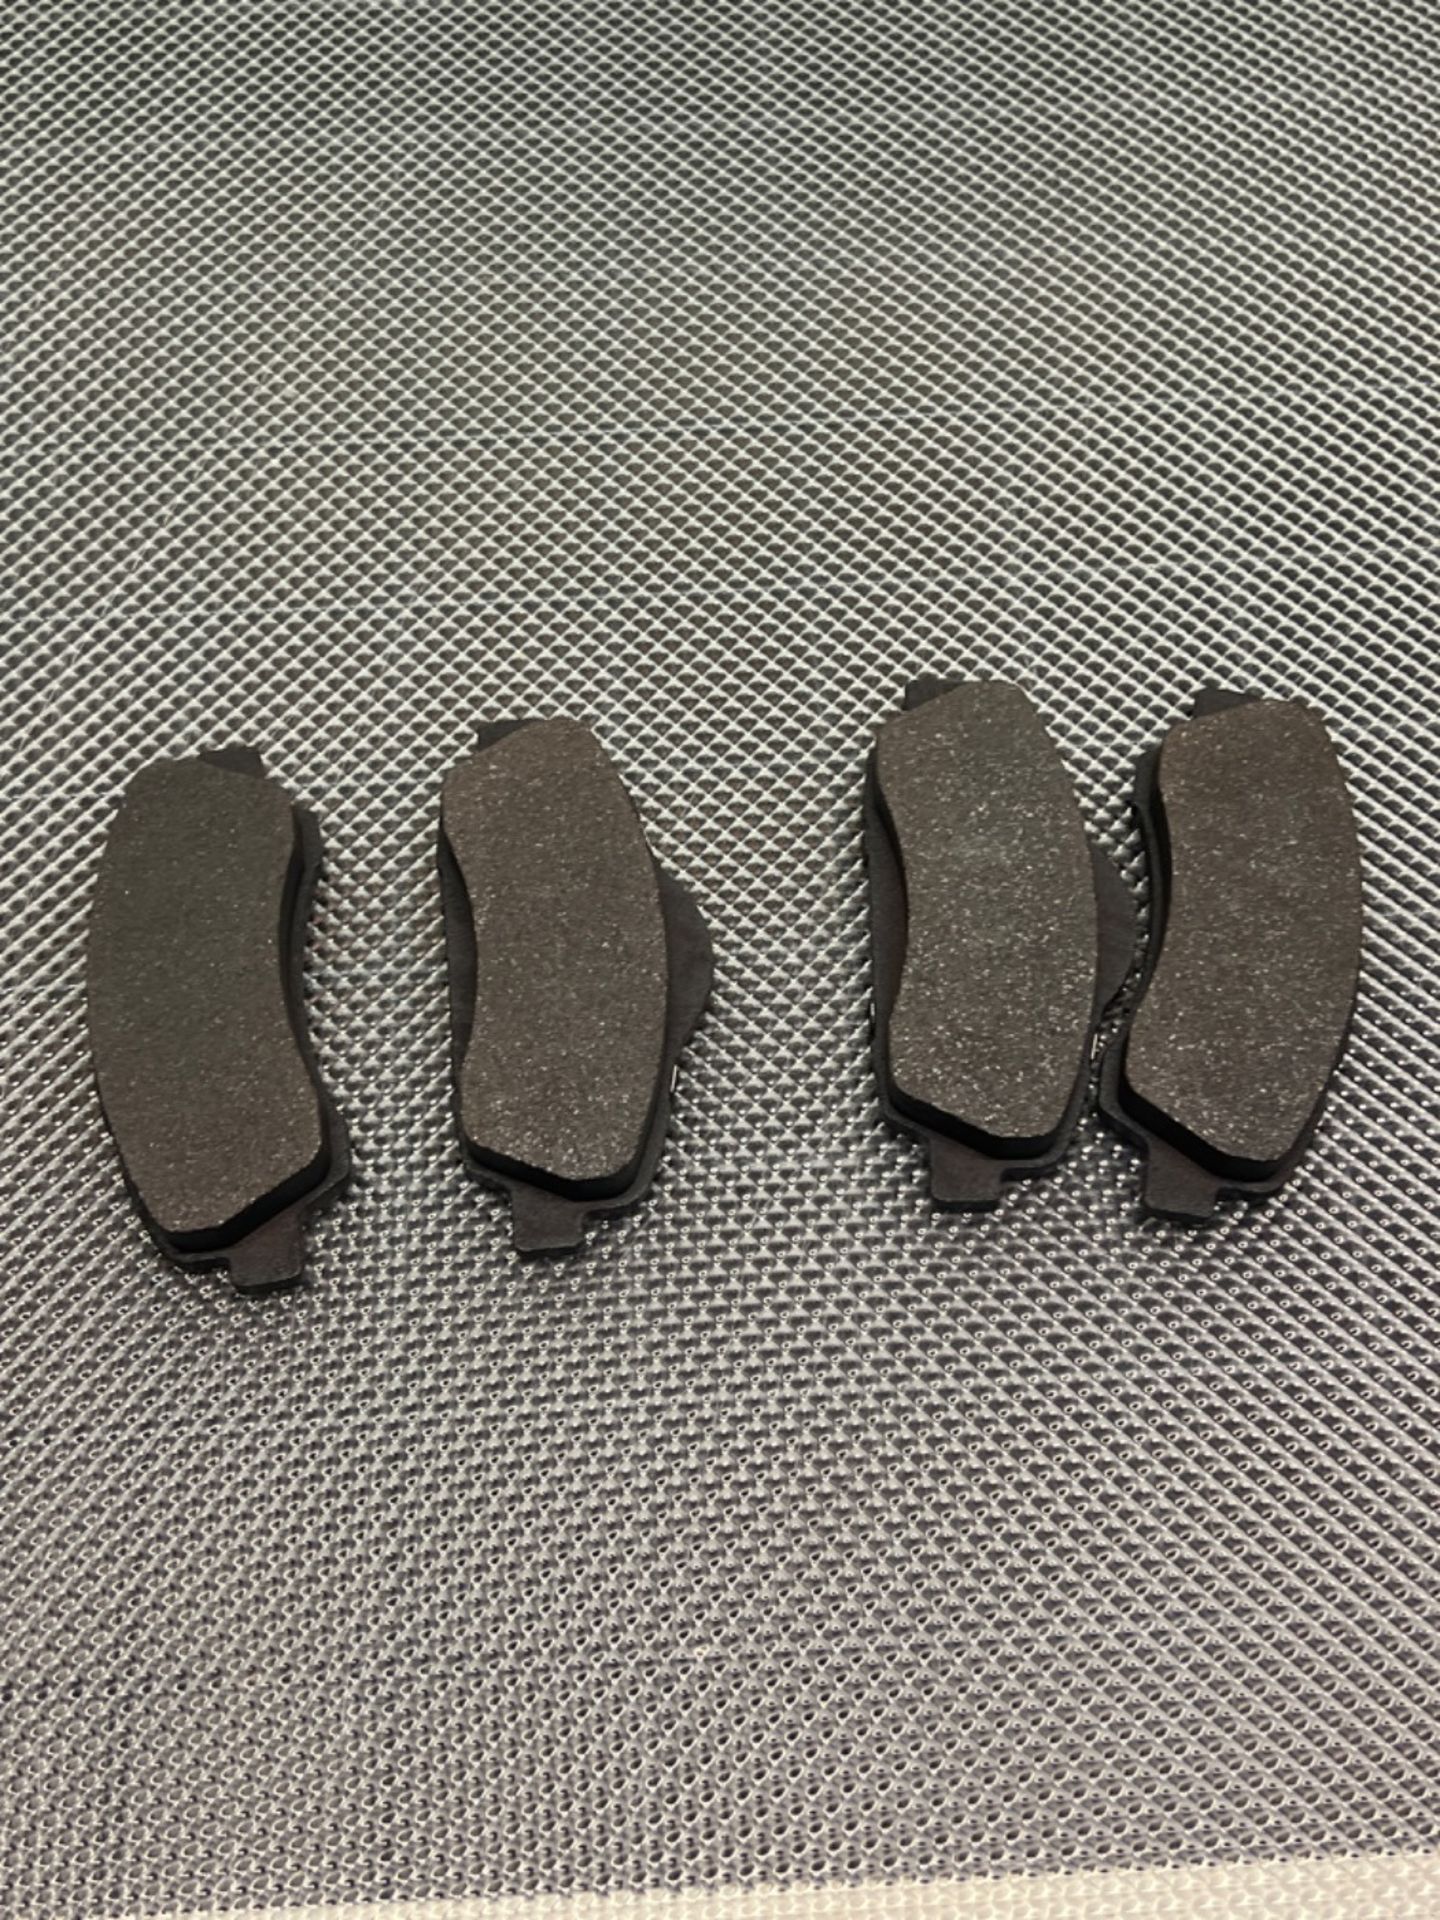 Bosch BP1708 Brake Pads - Front Axle - ECE-R90 Certified - 1 Set of 4 Pads - Image 2 of 3